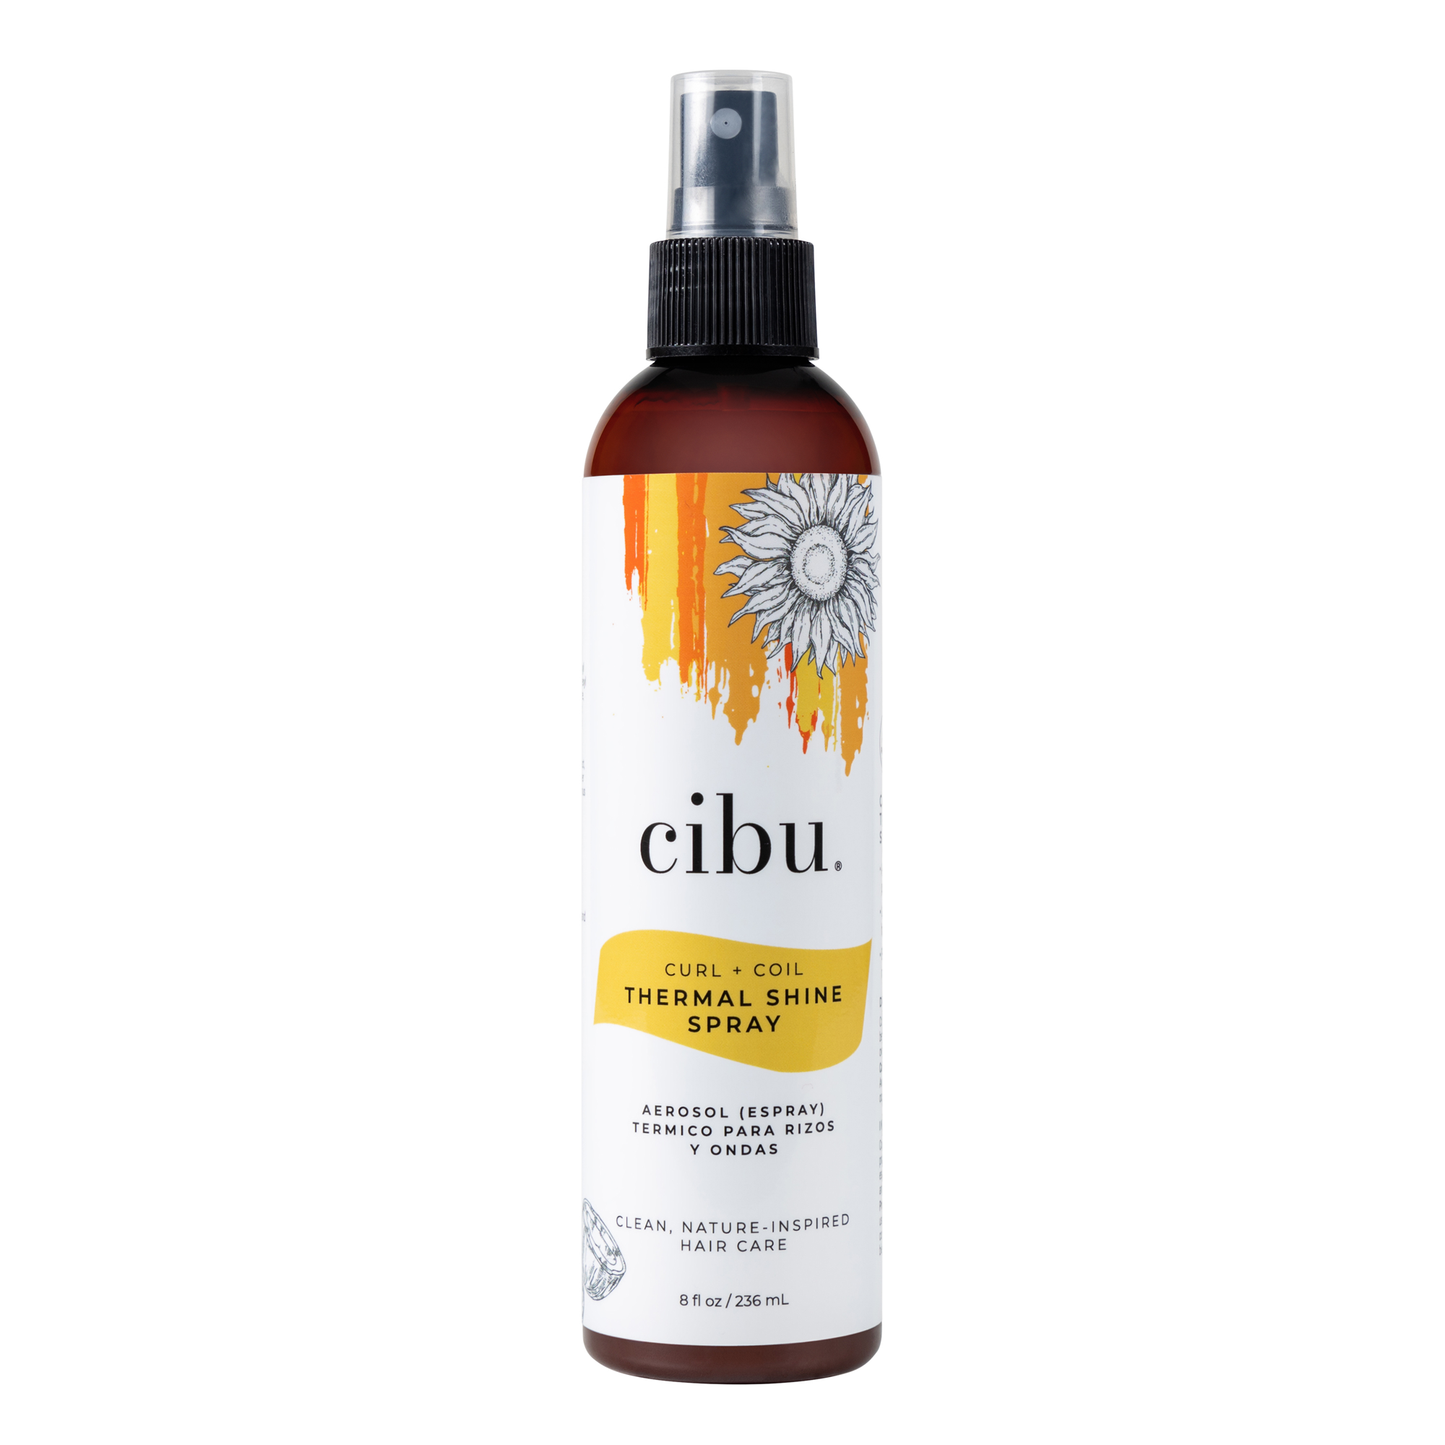 123 Curl + Coil Thermal Shine Spray